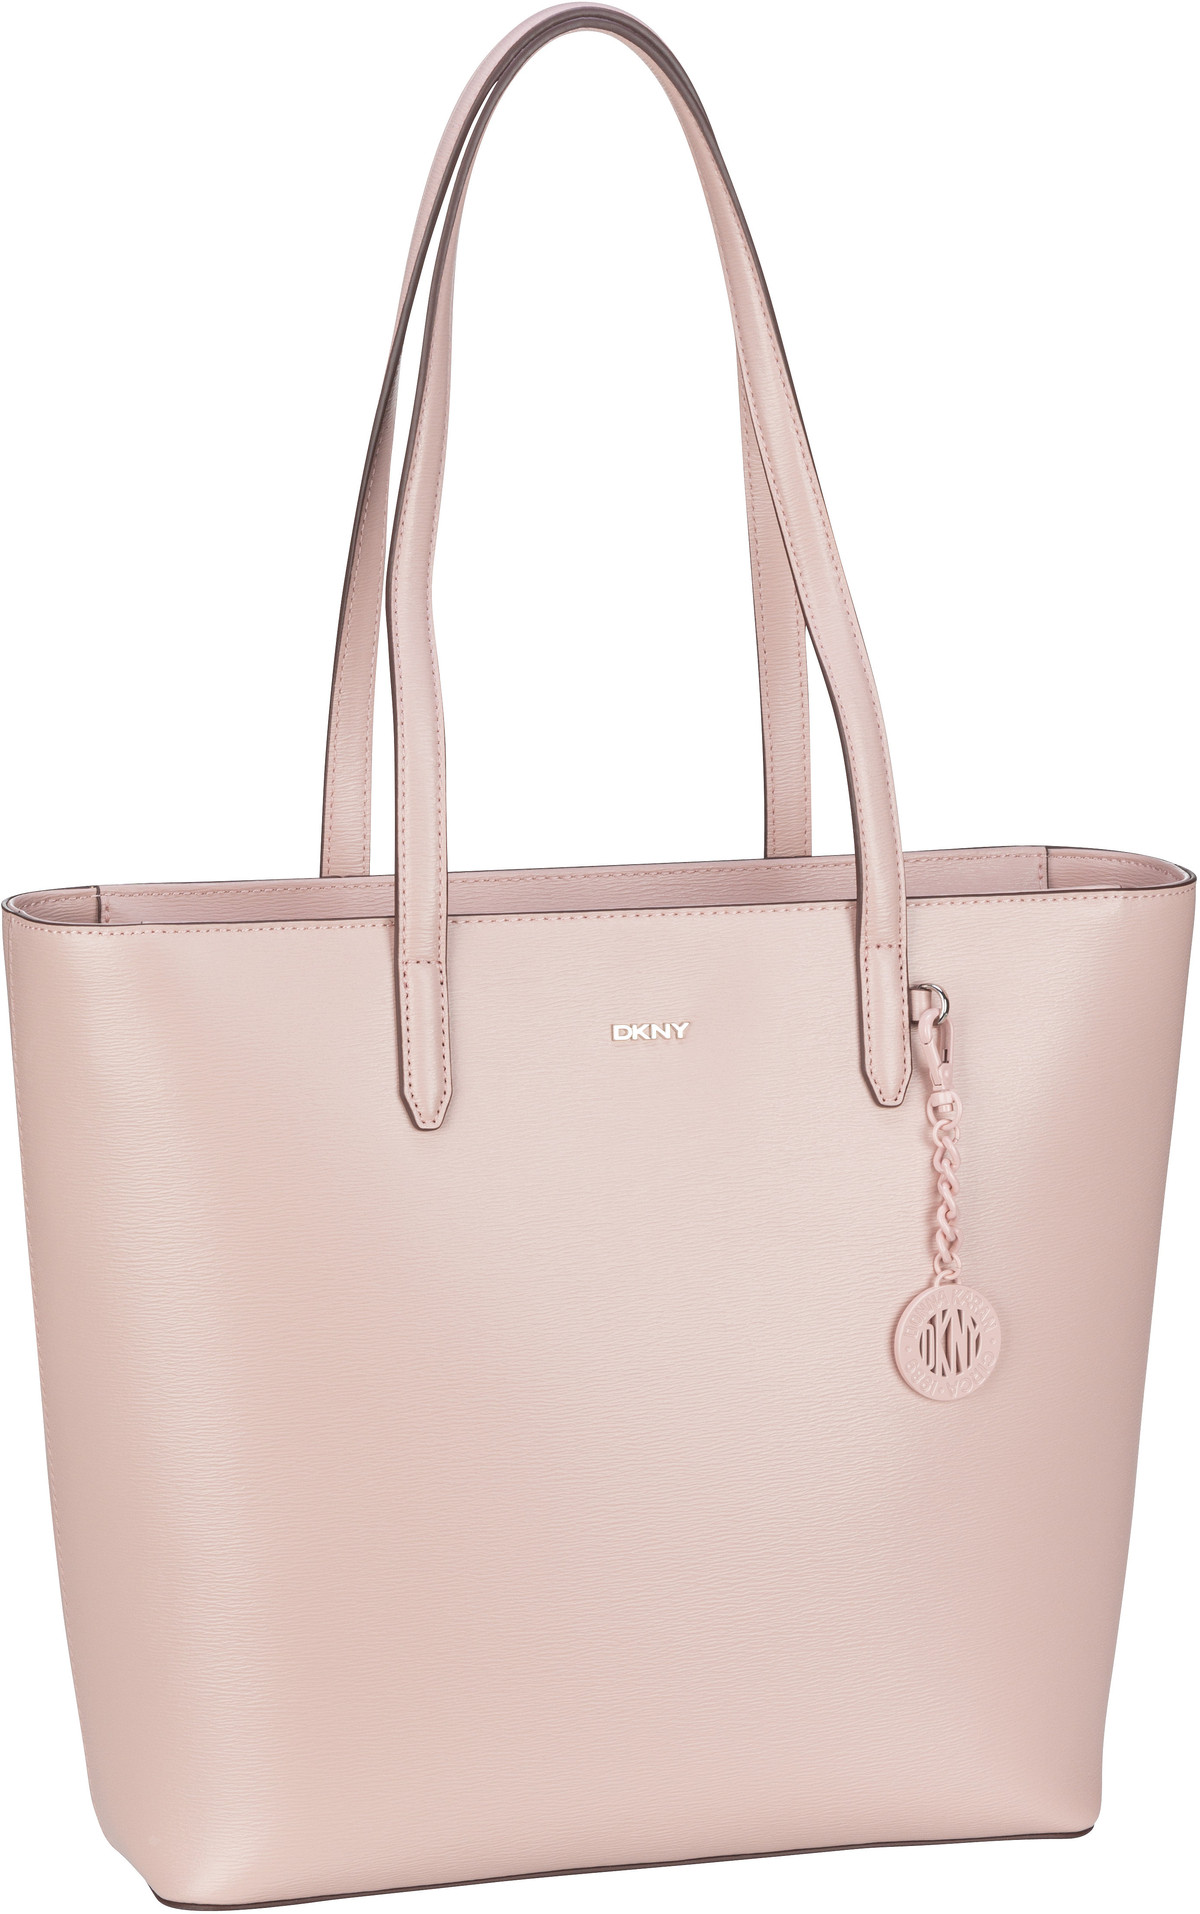 DKNY Bryant Sutton North South Tote - Cashmere/Silver